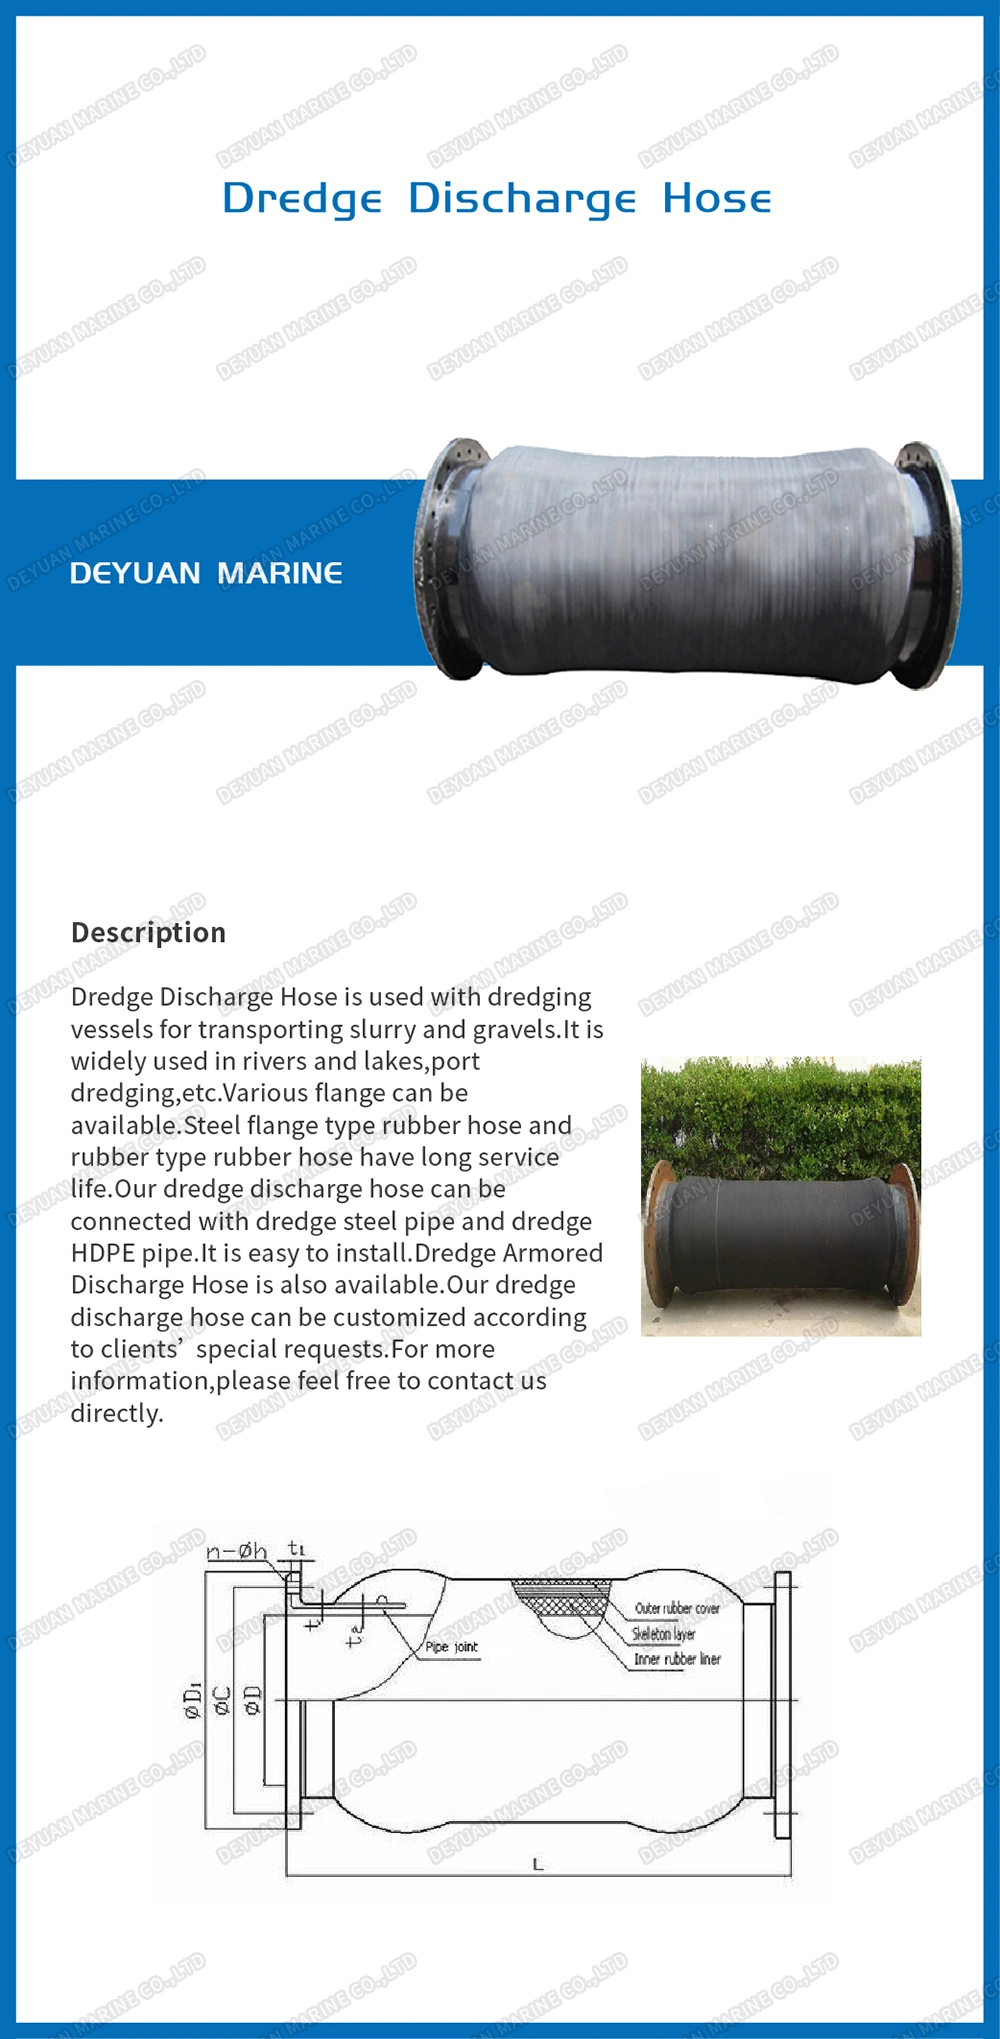 Drawing of Dredge Discharge Hose